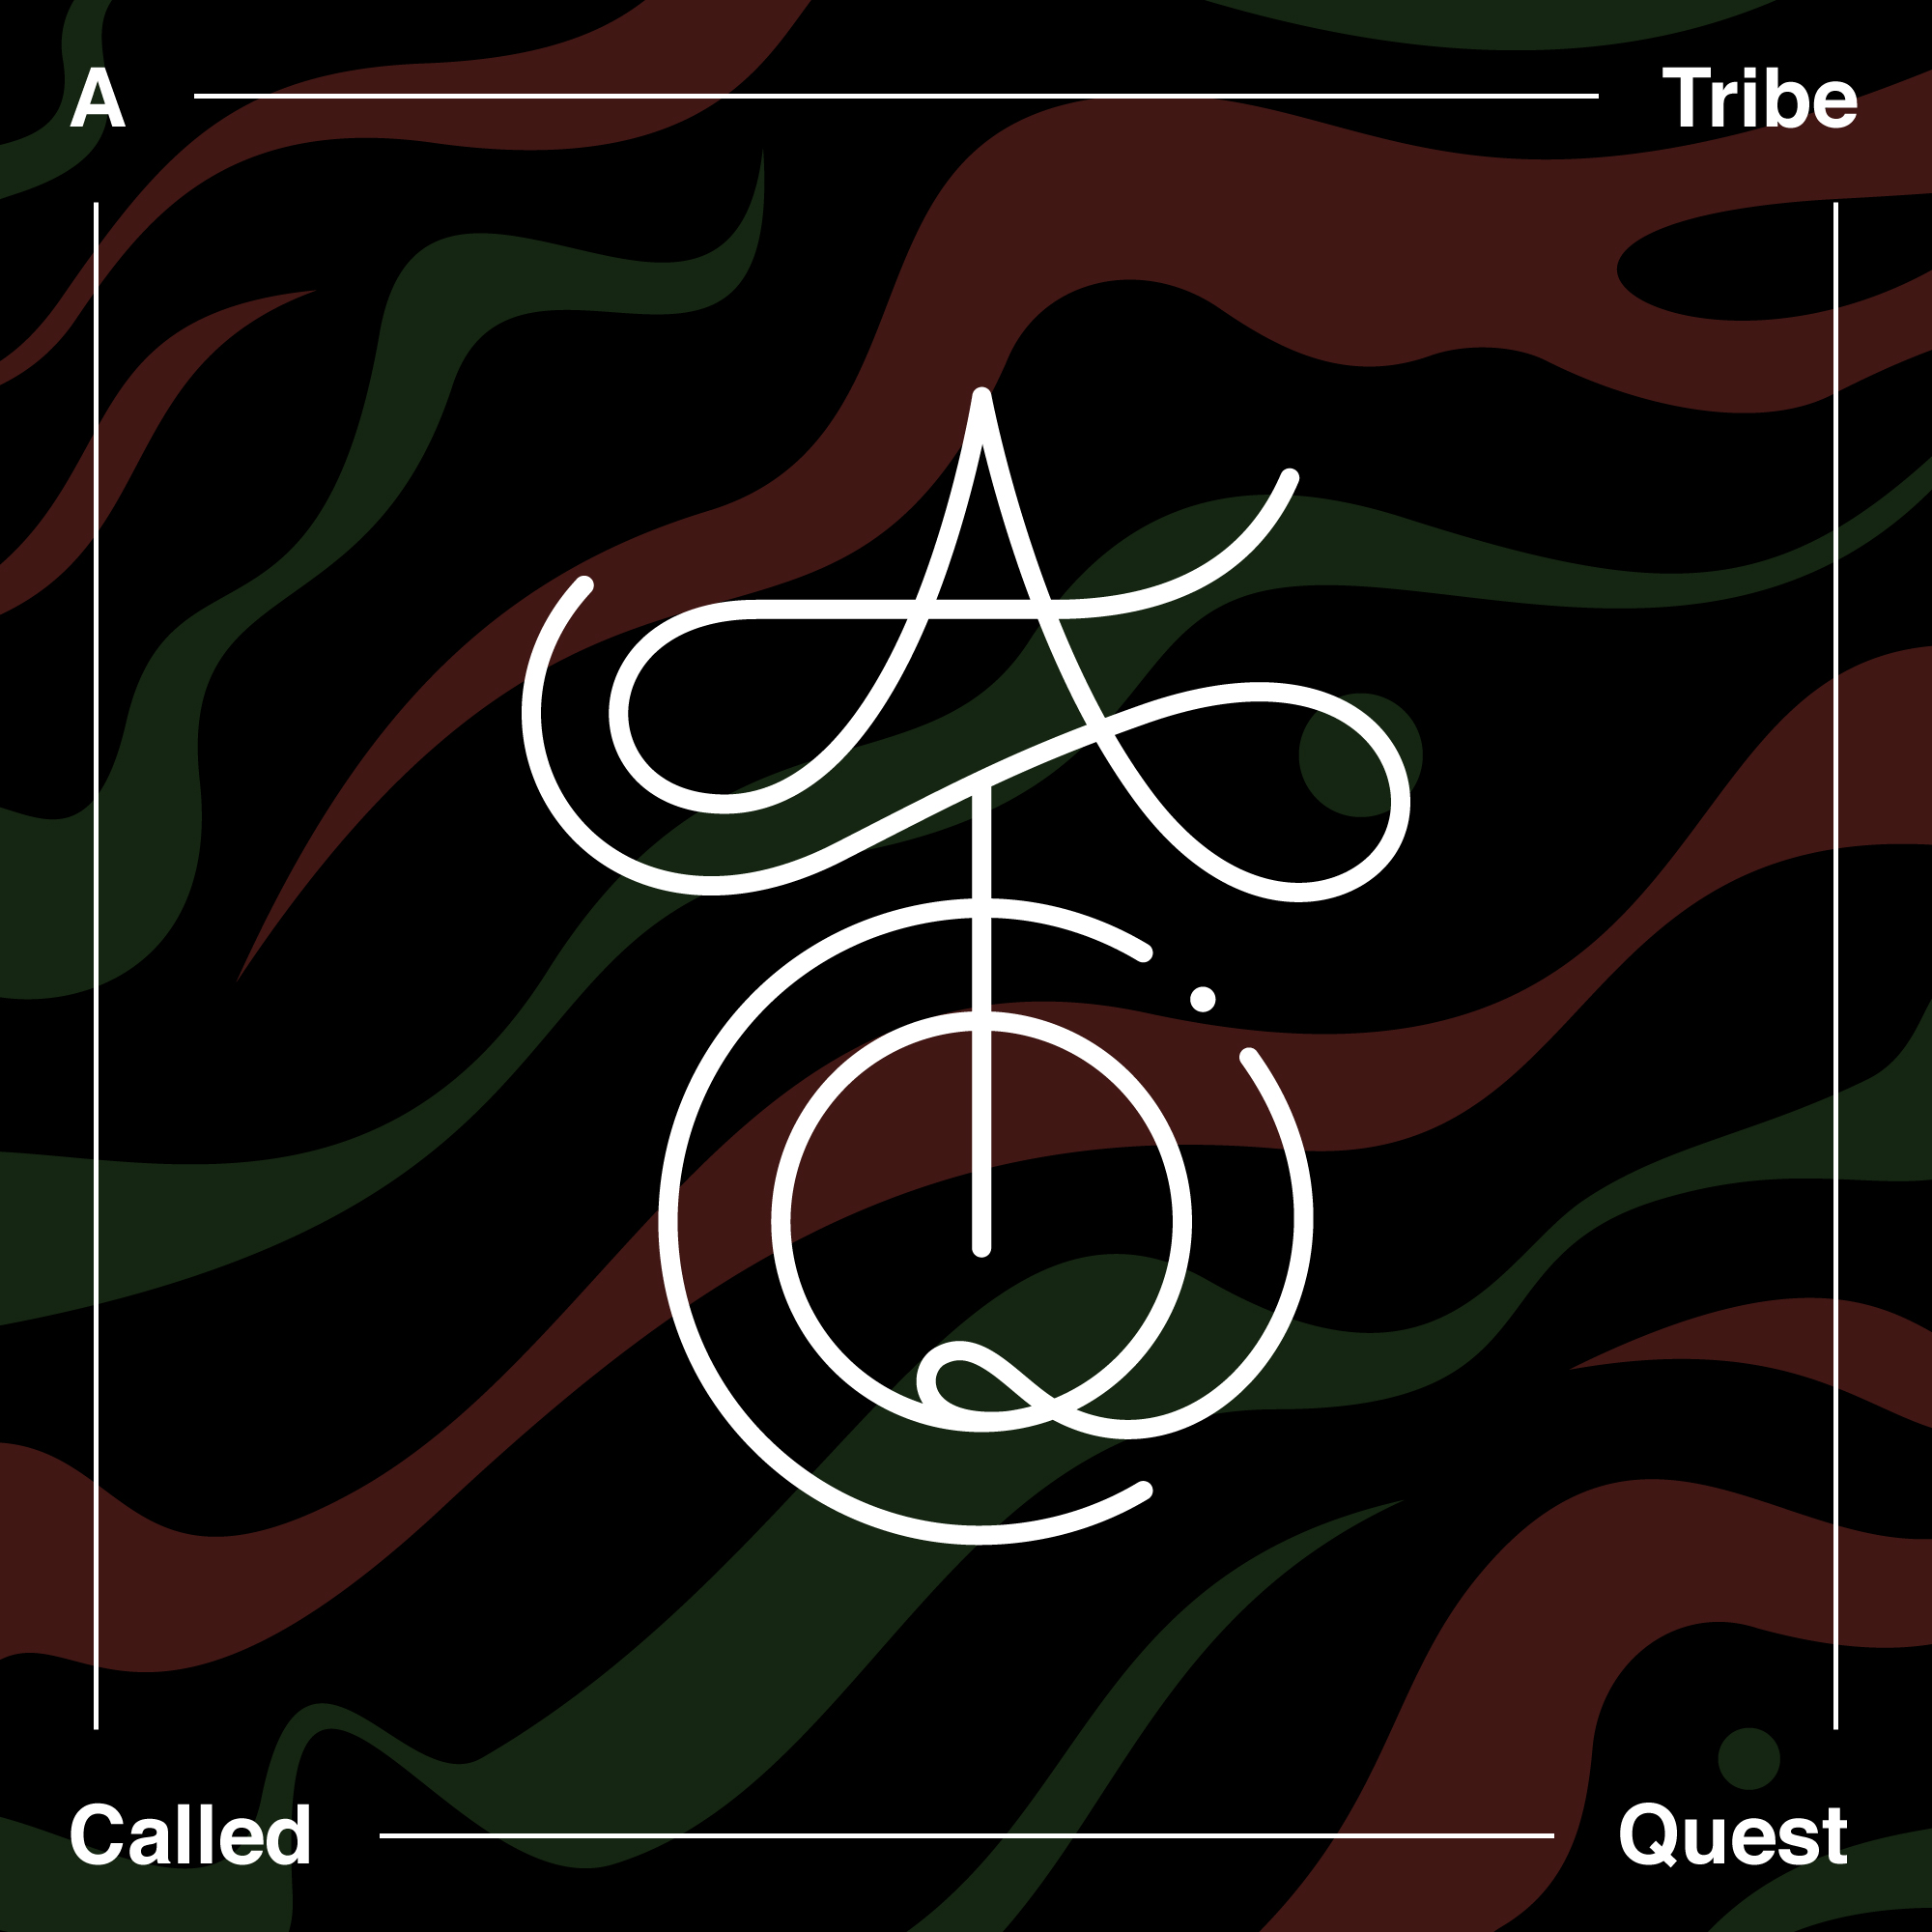 A Tribe Called Quest graphic branding identity design by Maximillian Piras